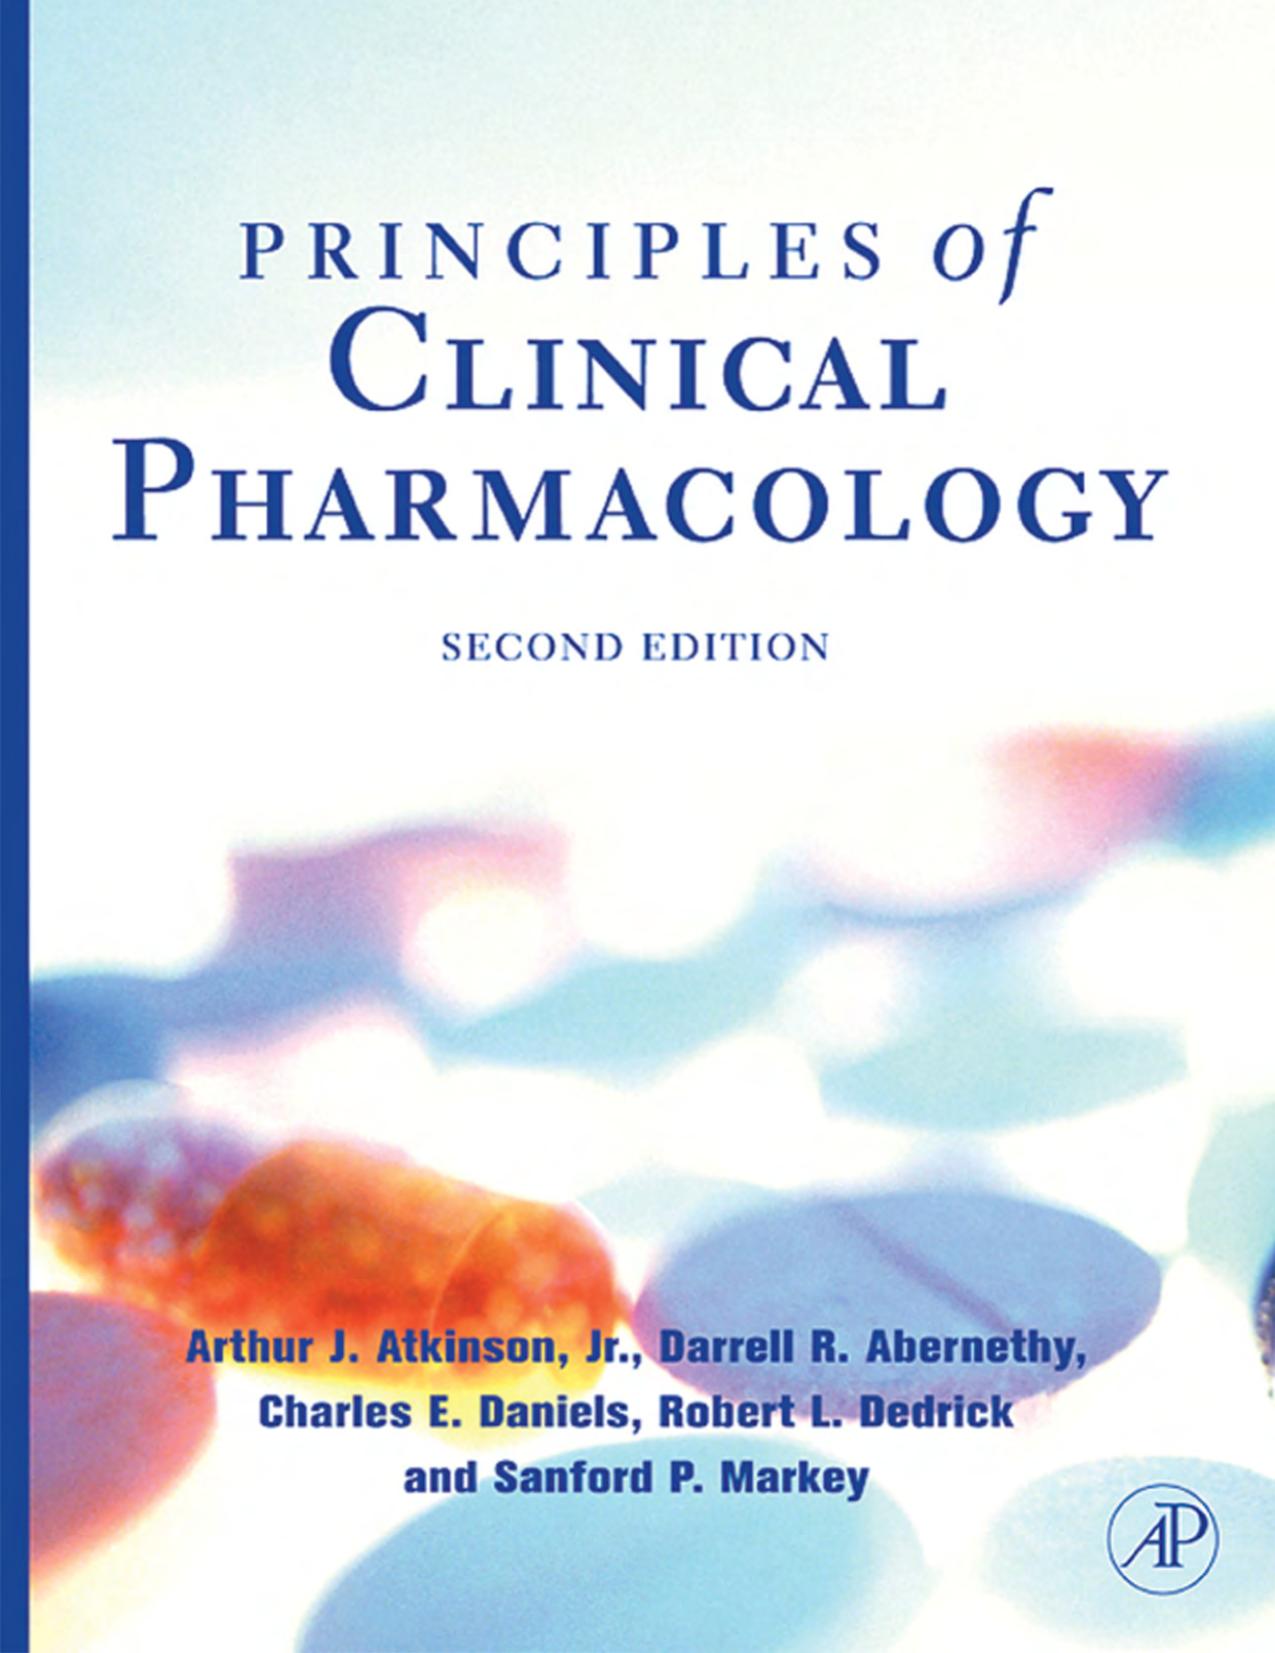 PRINCIPLES OF CLINICAL PHARMACOLOGY 2nd ed 2007